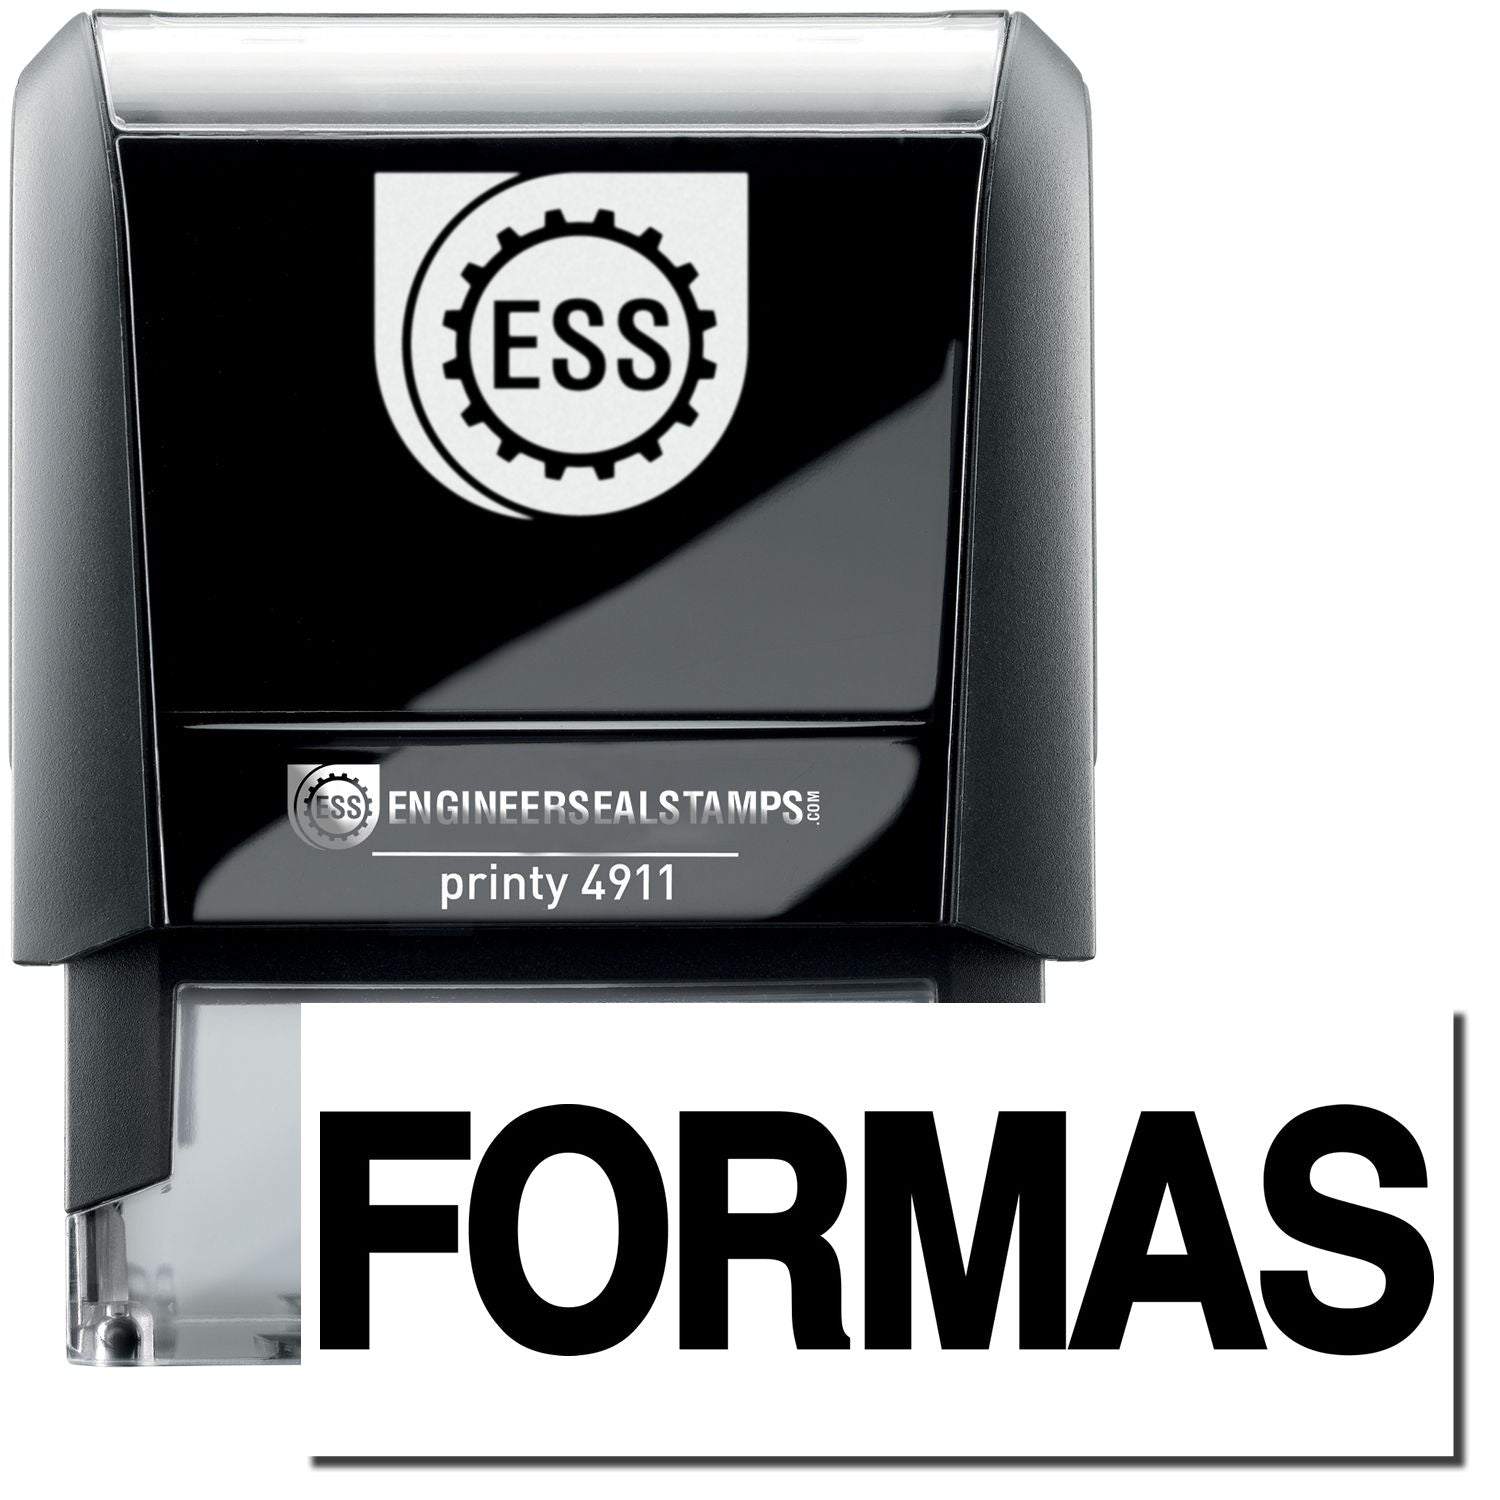 A self-inking stamp with a stamped image showing how the text "FORMAS" is displayed after stamping.